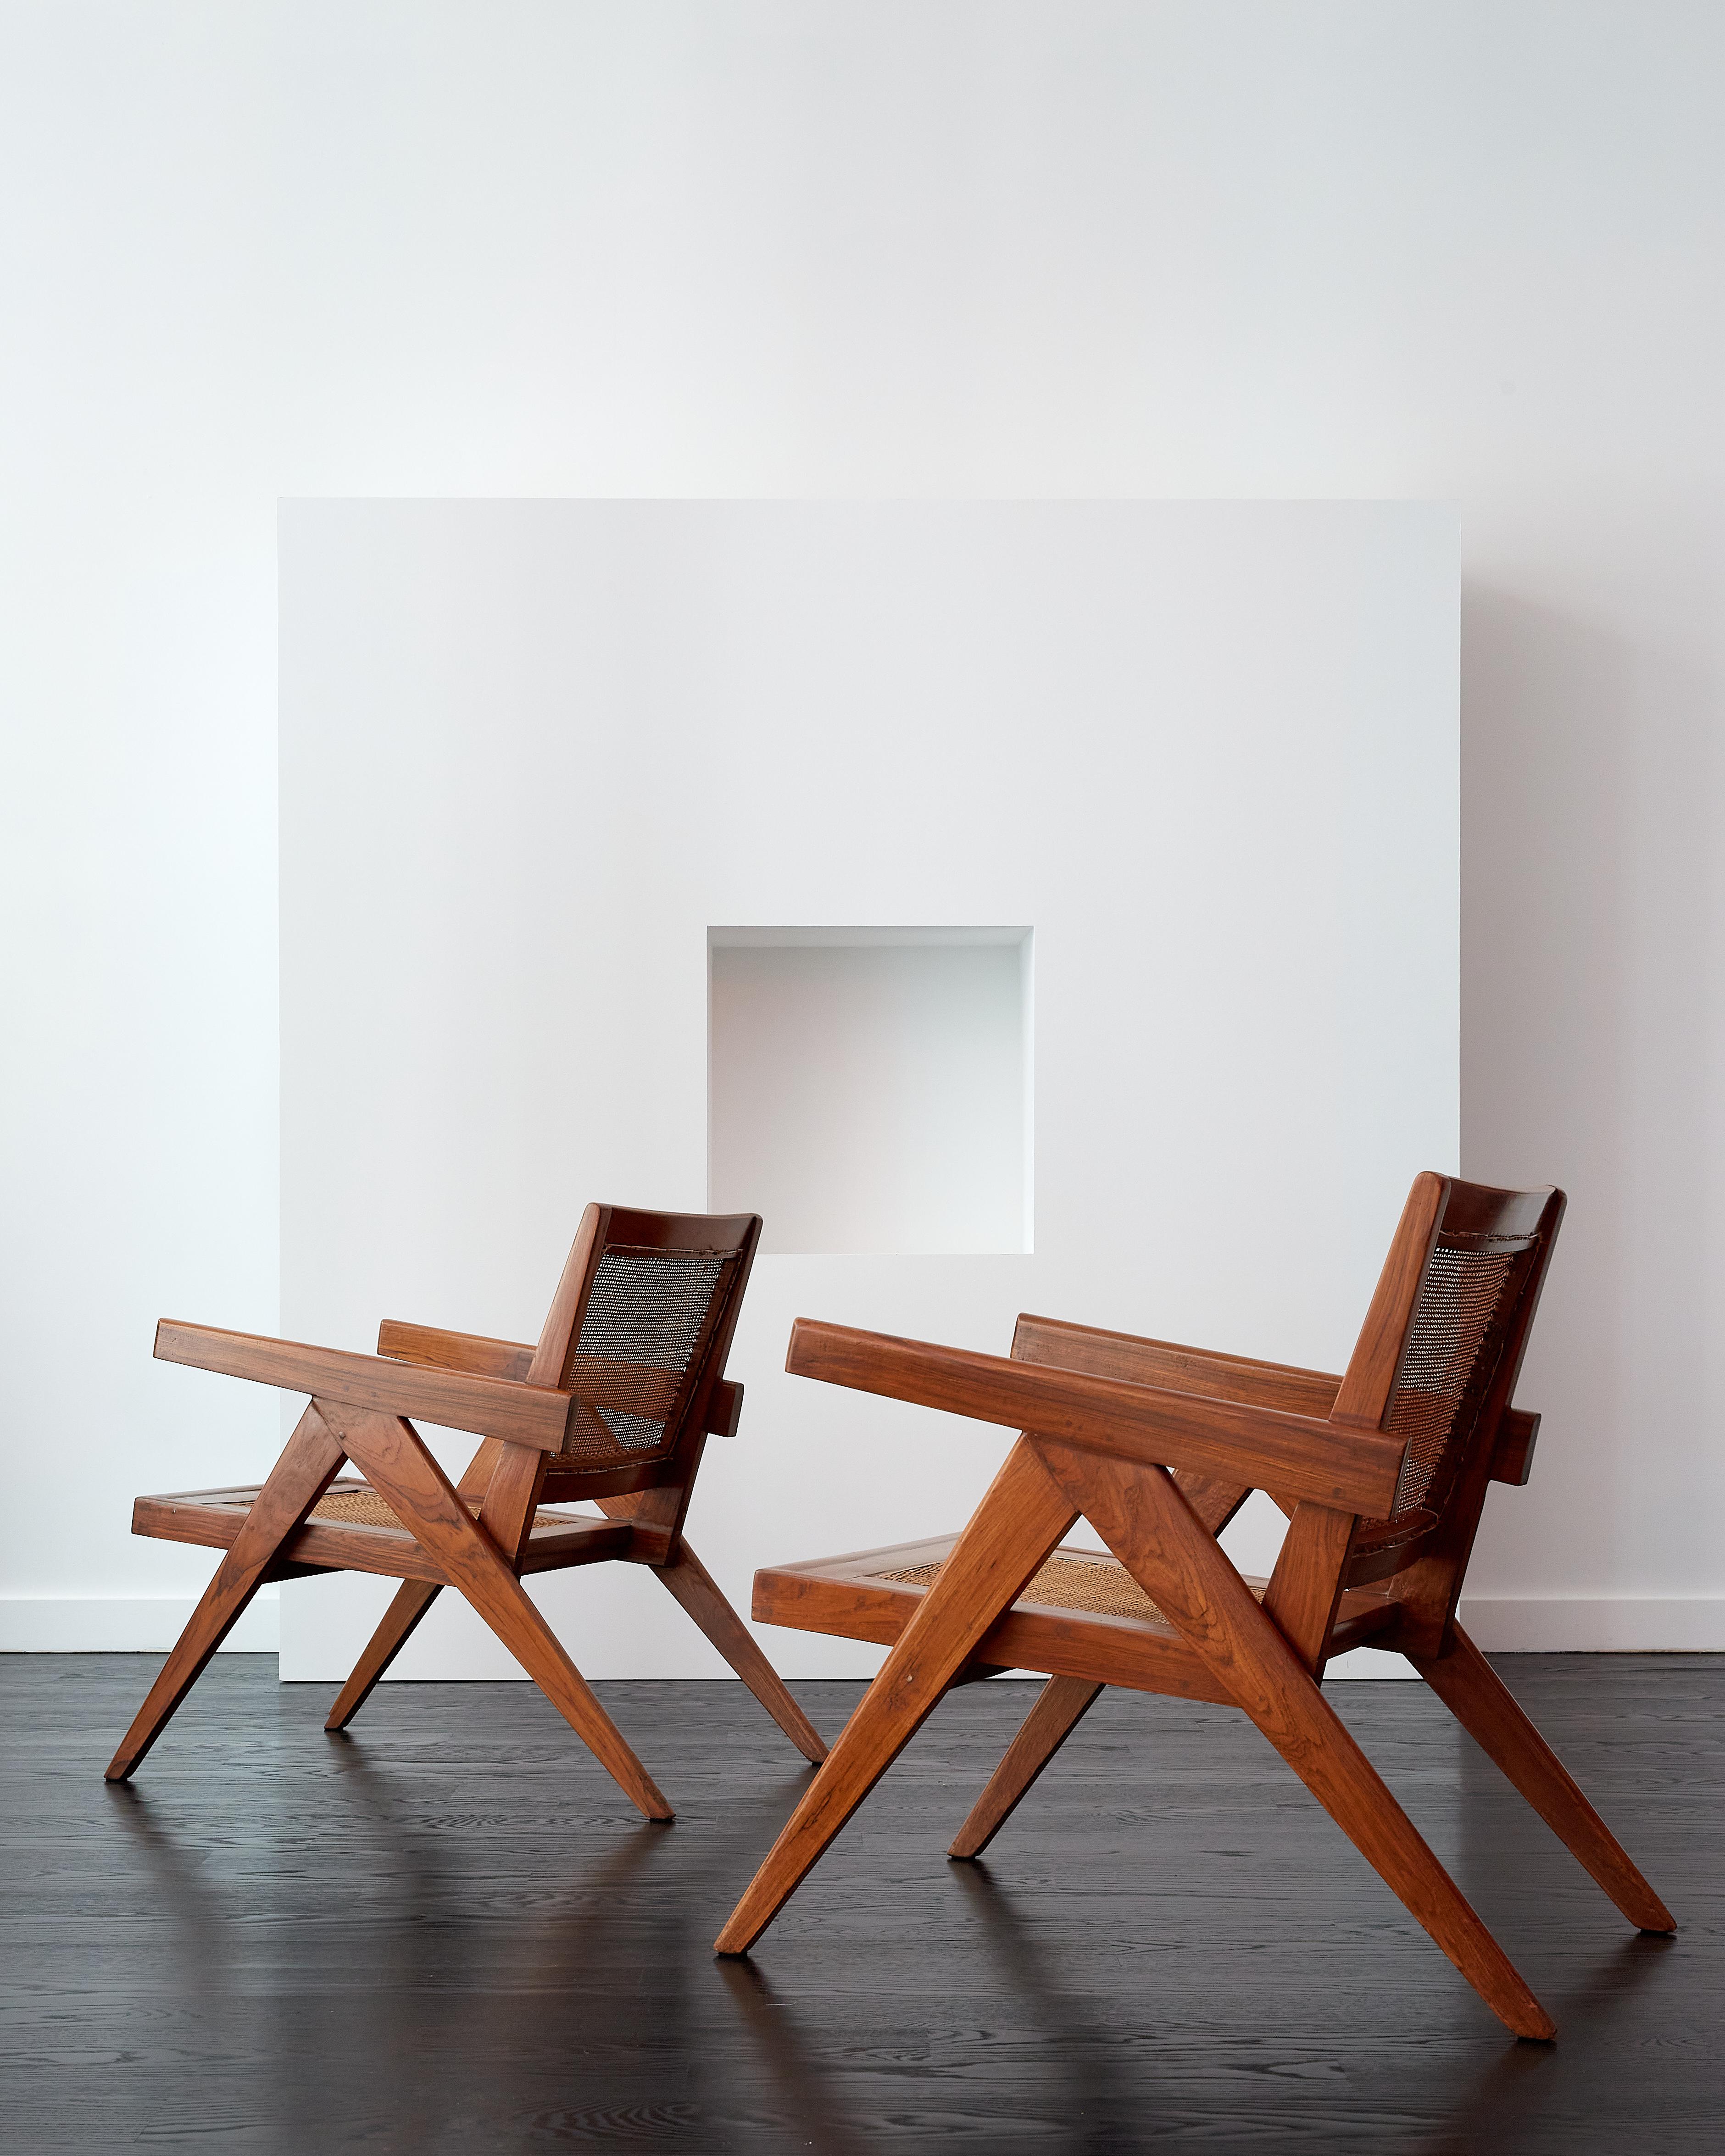 A unique pair of Pierre Jeanneret solid teak lounge chairs with an extreme splay in the inverted ‘V’ type assembly legs.

Chandigarh c. 1960

Beautiful grain in the teak frame and legs.

Hand caned and gently conserved.

Provenance: